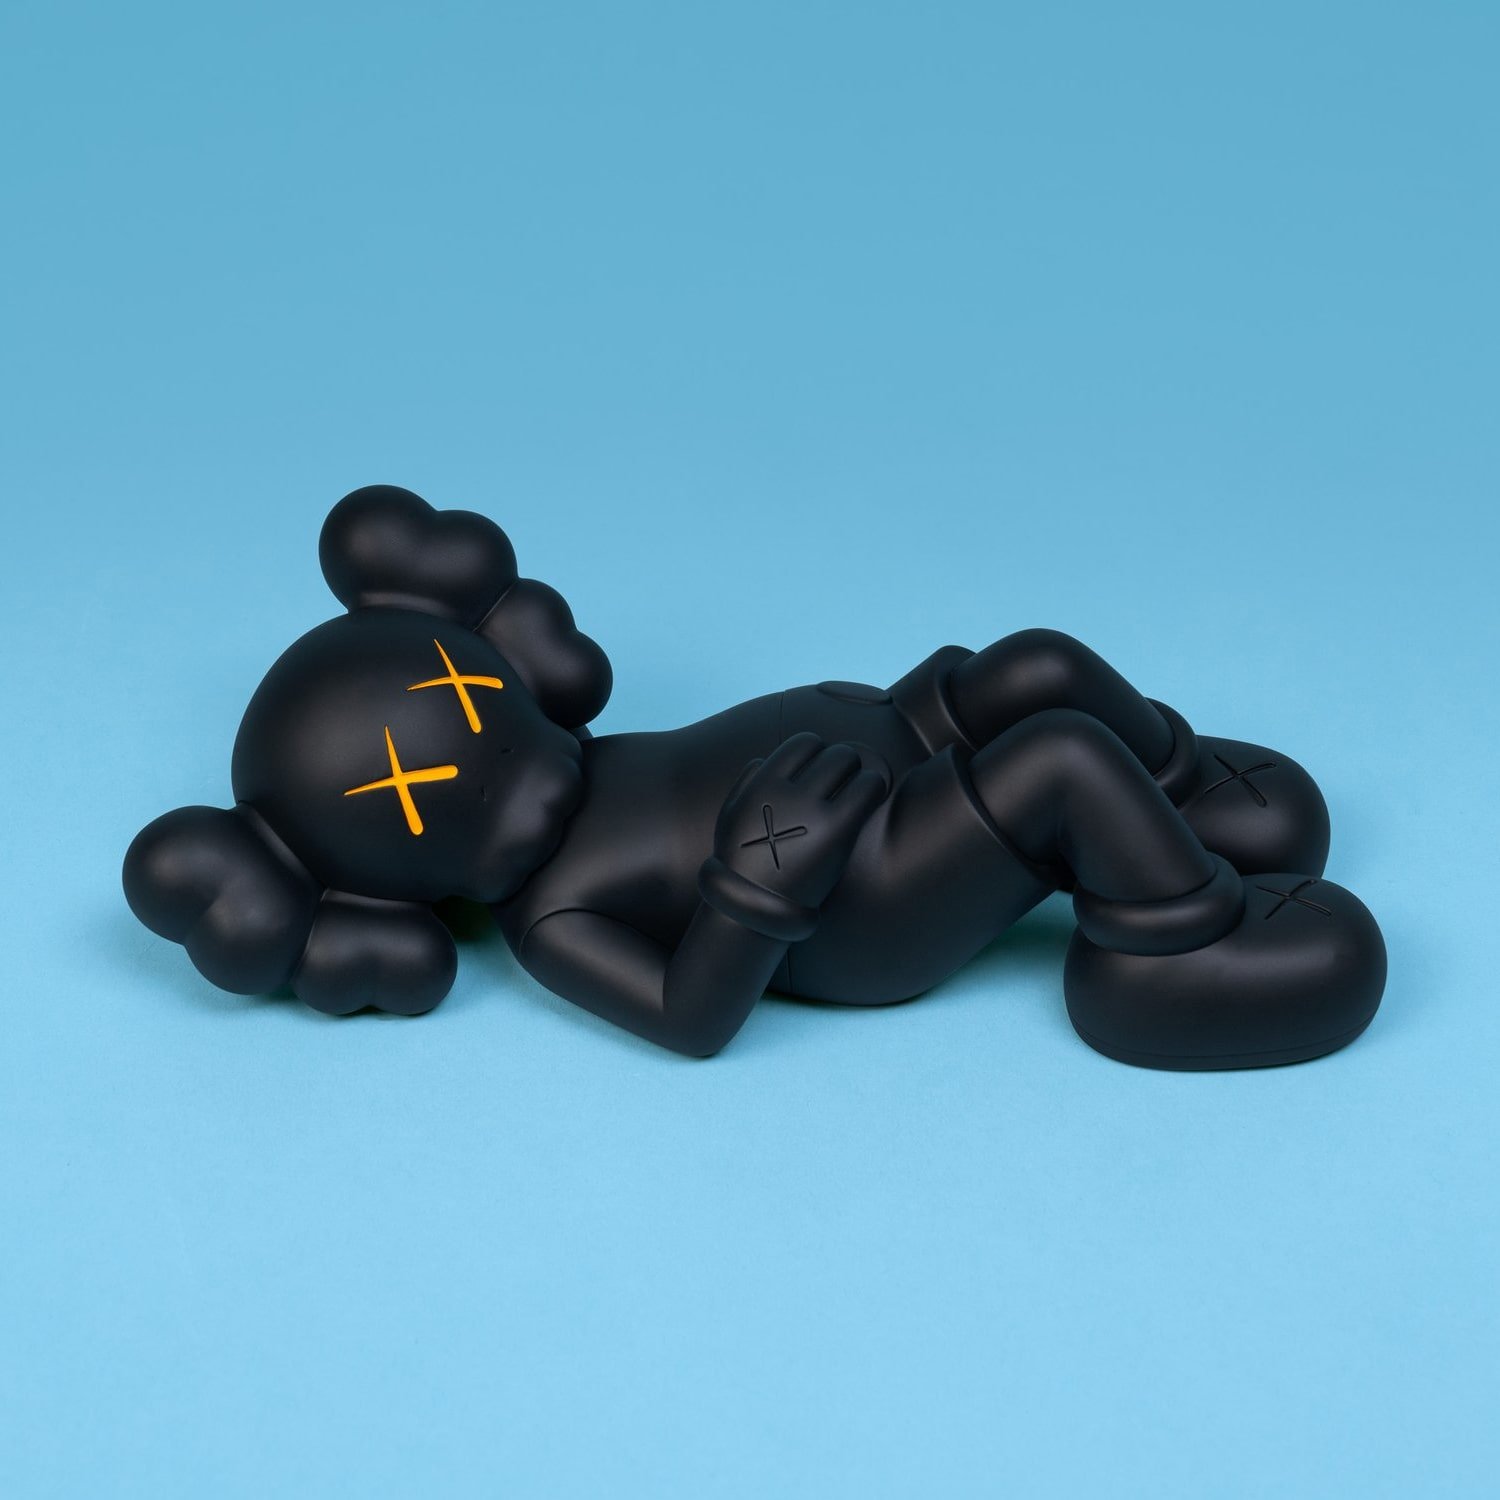 Holiday Japan black figure by Kaws from 2019 - Dope! Gallery